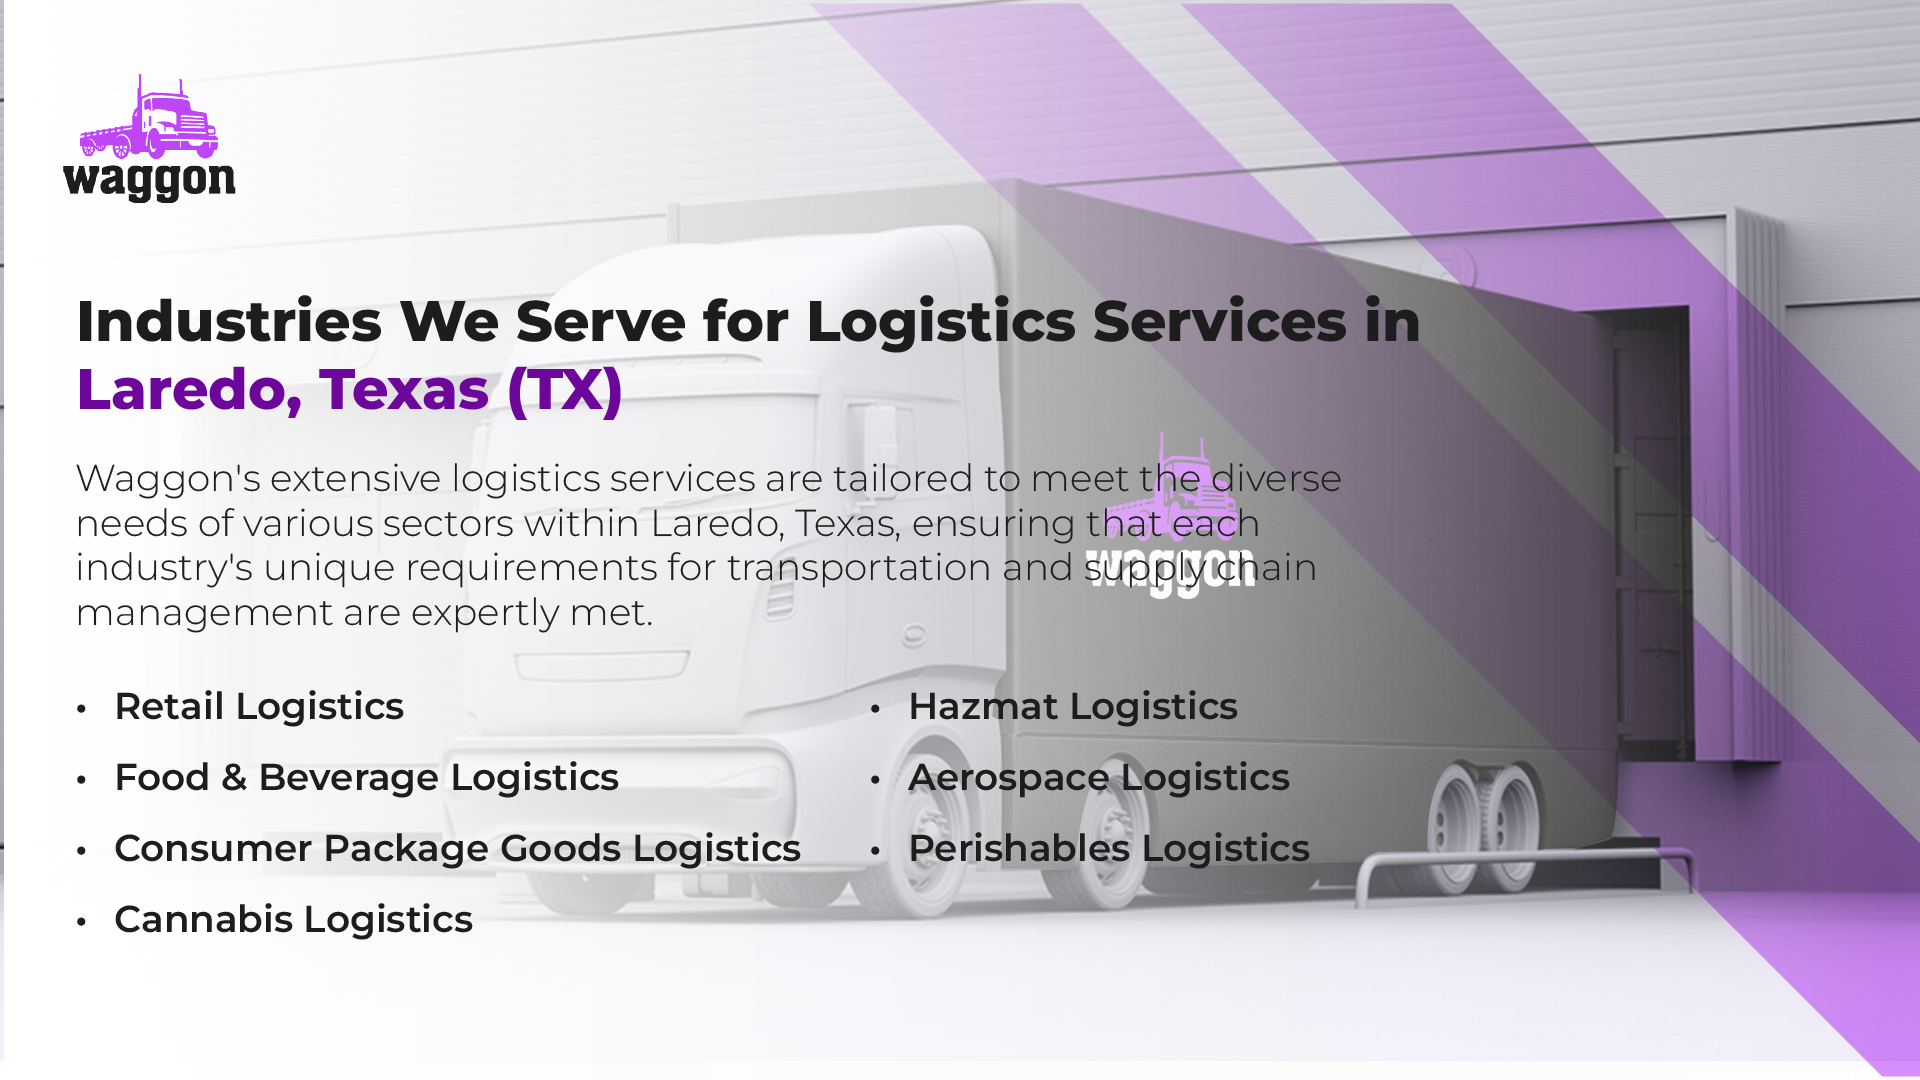 Industries We Serve for Logistics Services in Laredo, Texas (TX)